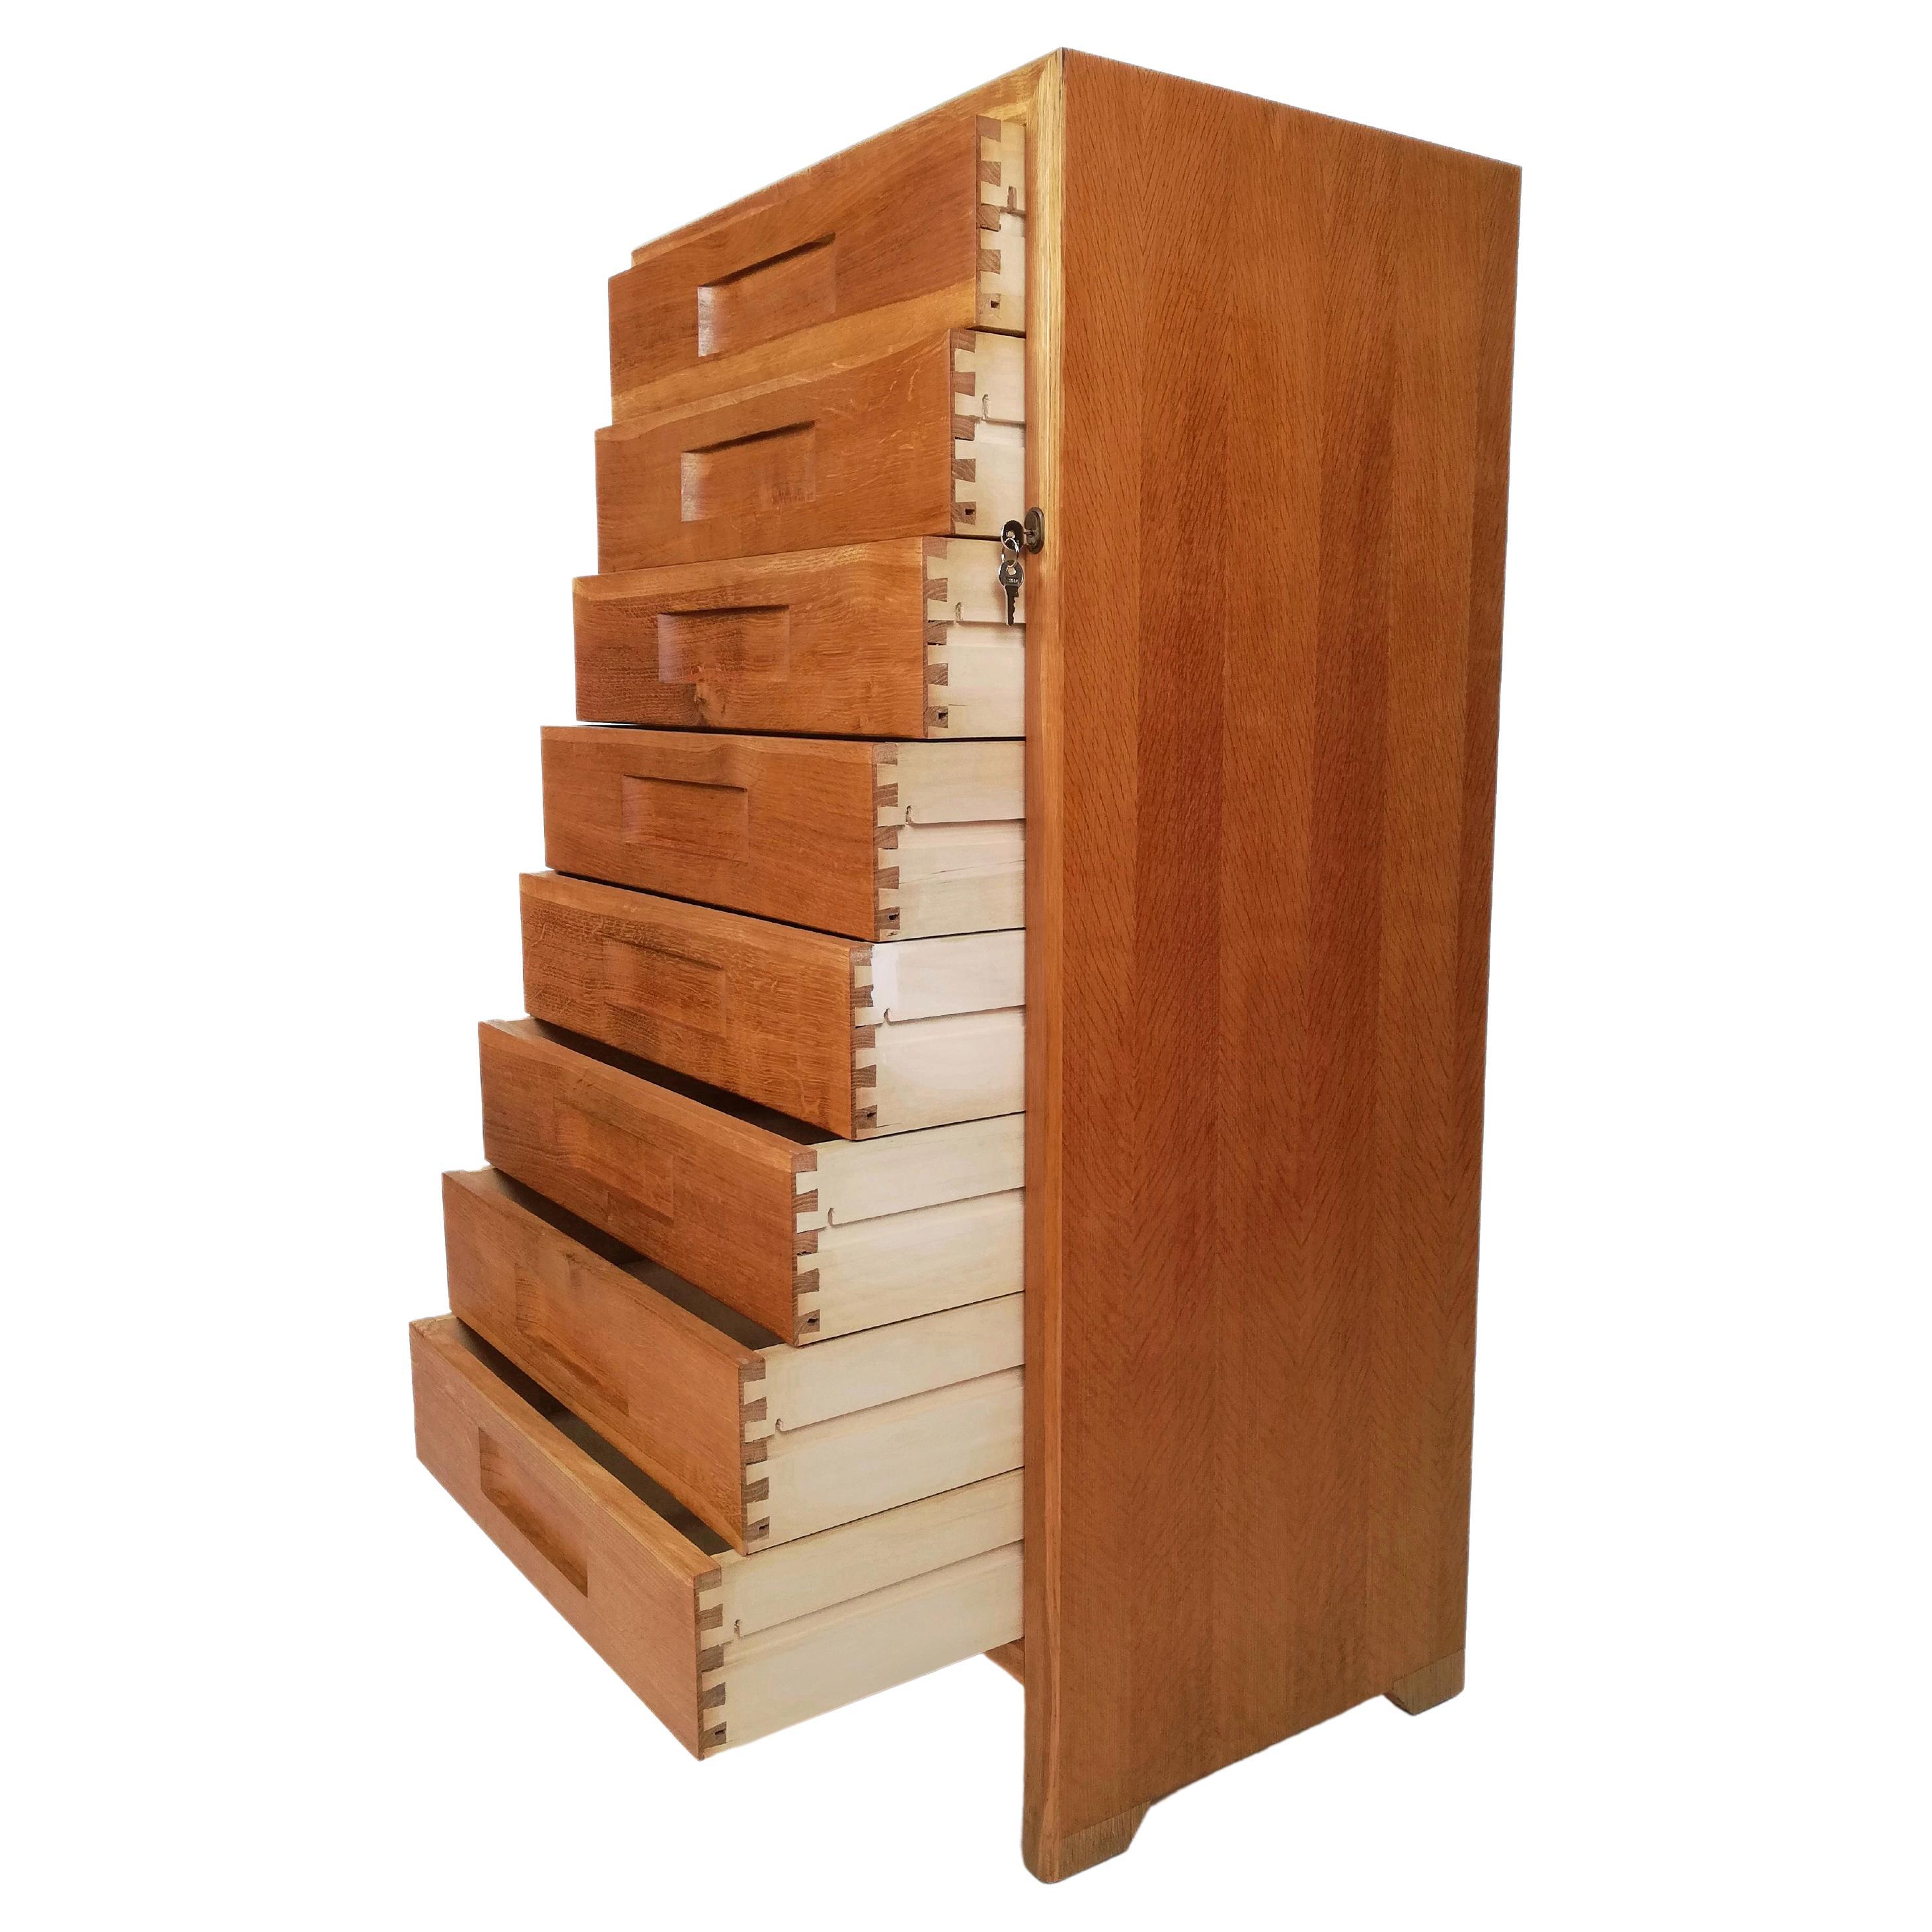 Italian Vintage Oak and Birch Wood Office Tallboy Chest of Drawers, 1960s For Sale